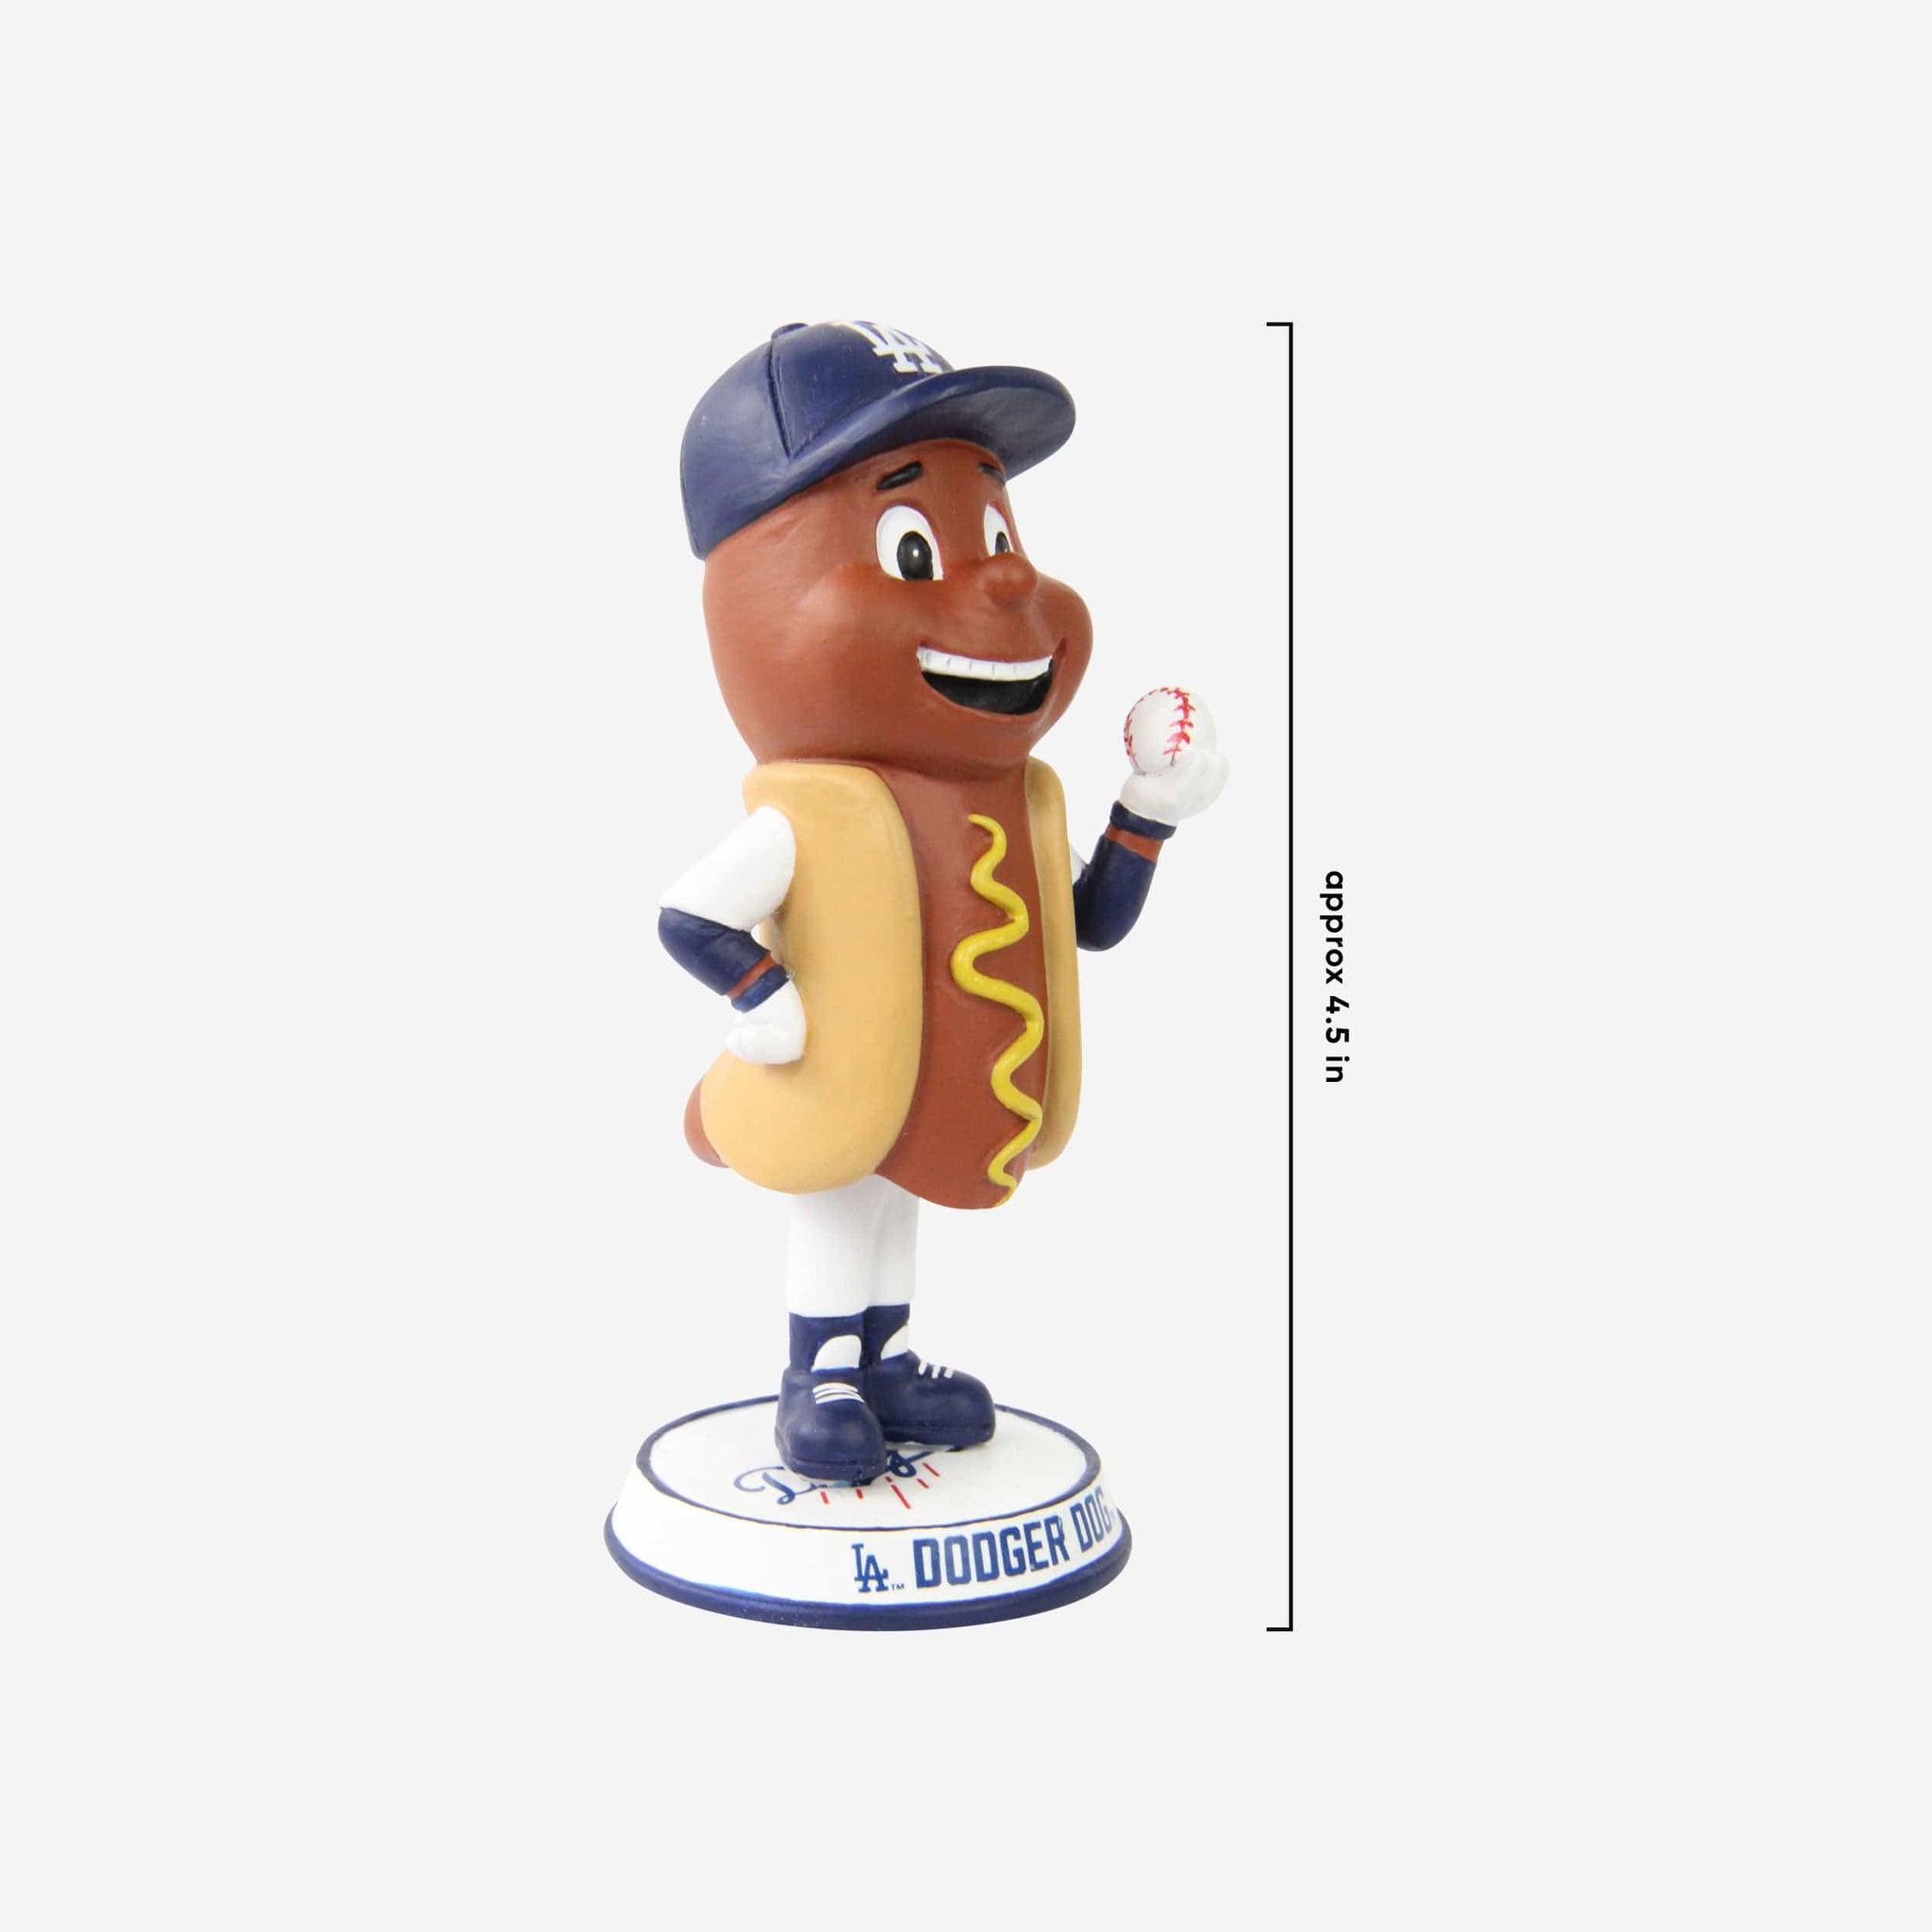 Dodger Dog Mascot 2023 Los Angeles Dodgers MINI Big Head 5 Bobblehead  Limited Edition ONLY 144 produced! at 's Sports Collectibles Store